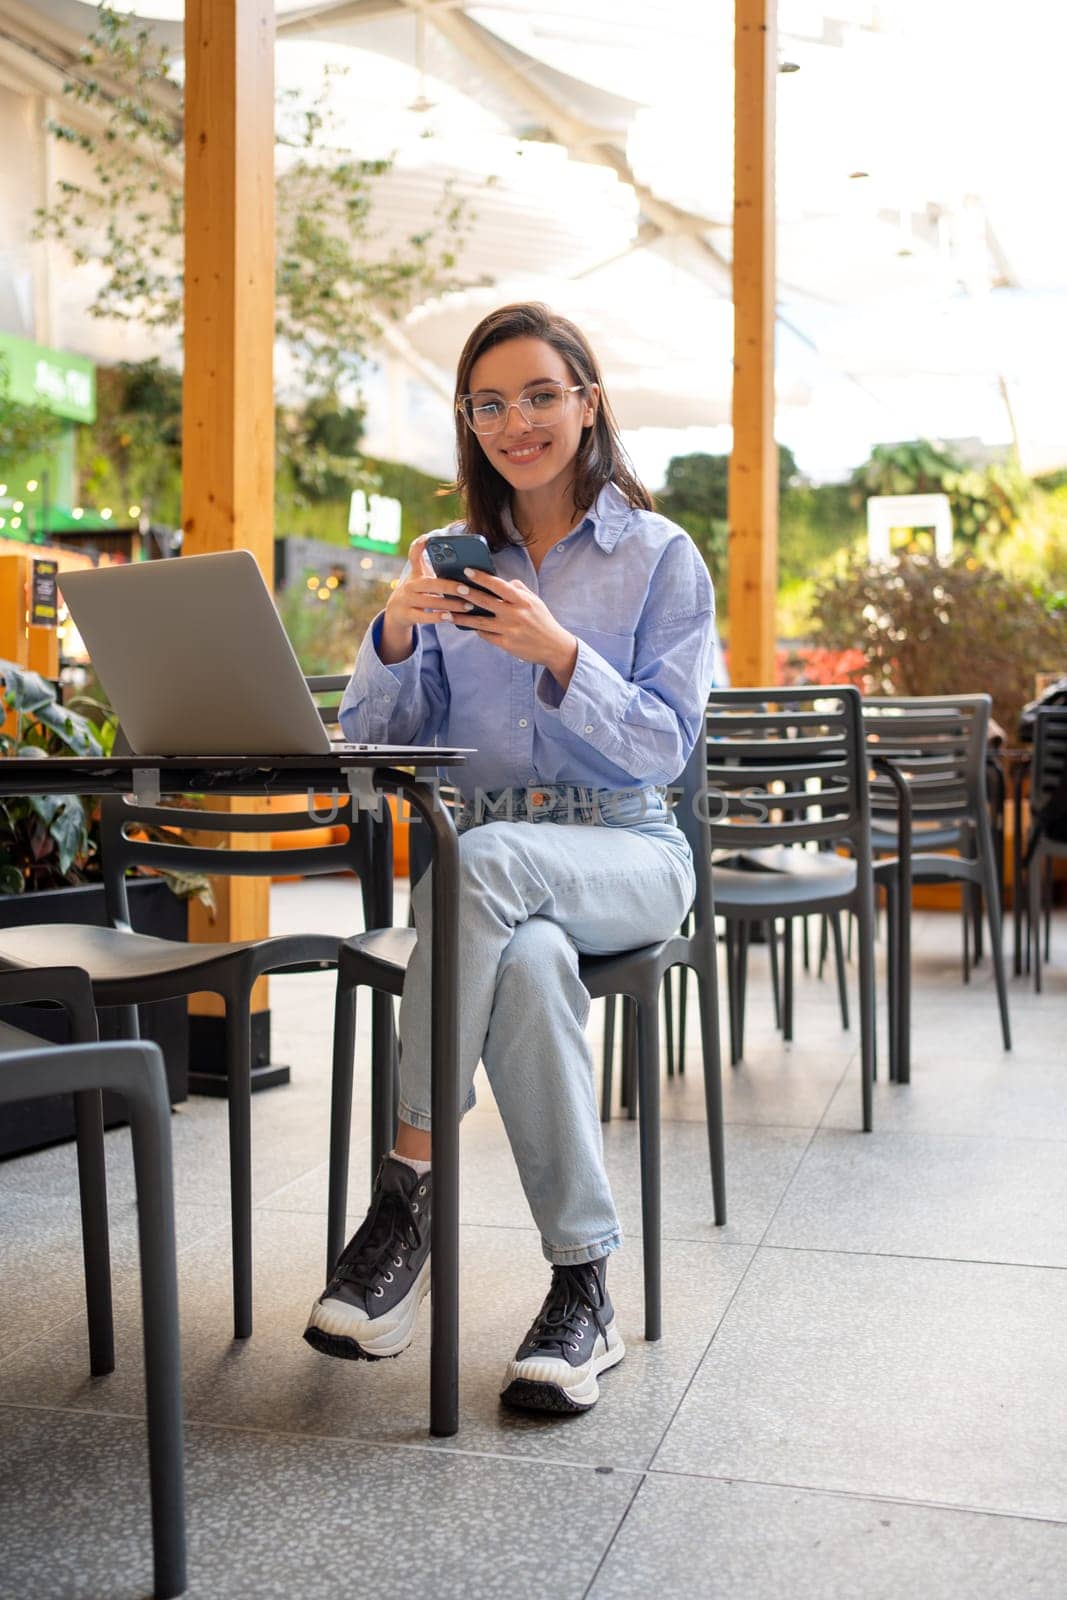 Freelance worker doing remote work using smartphone and laptop, looking at camera and smile. Female freelancer with mobile phone in outdoor cafe. Full length vertical shoot